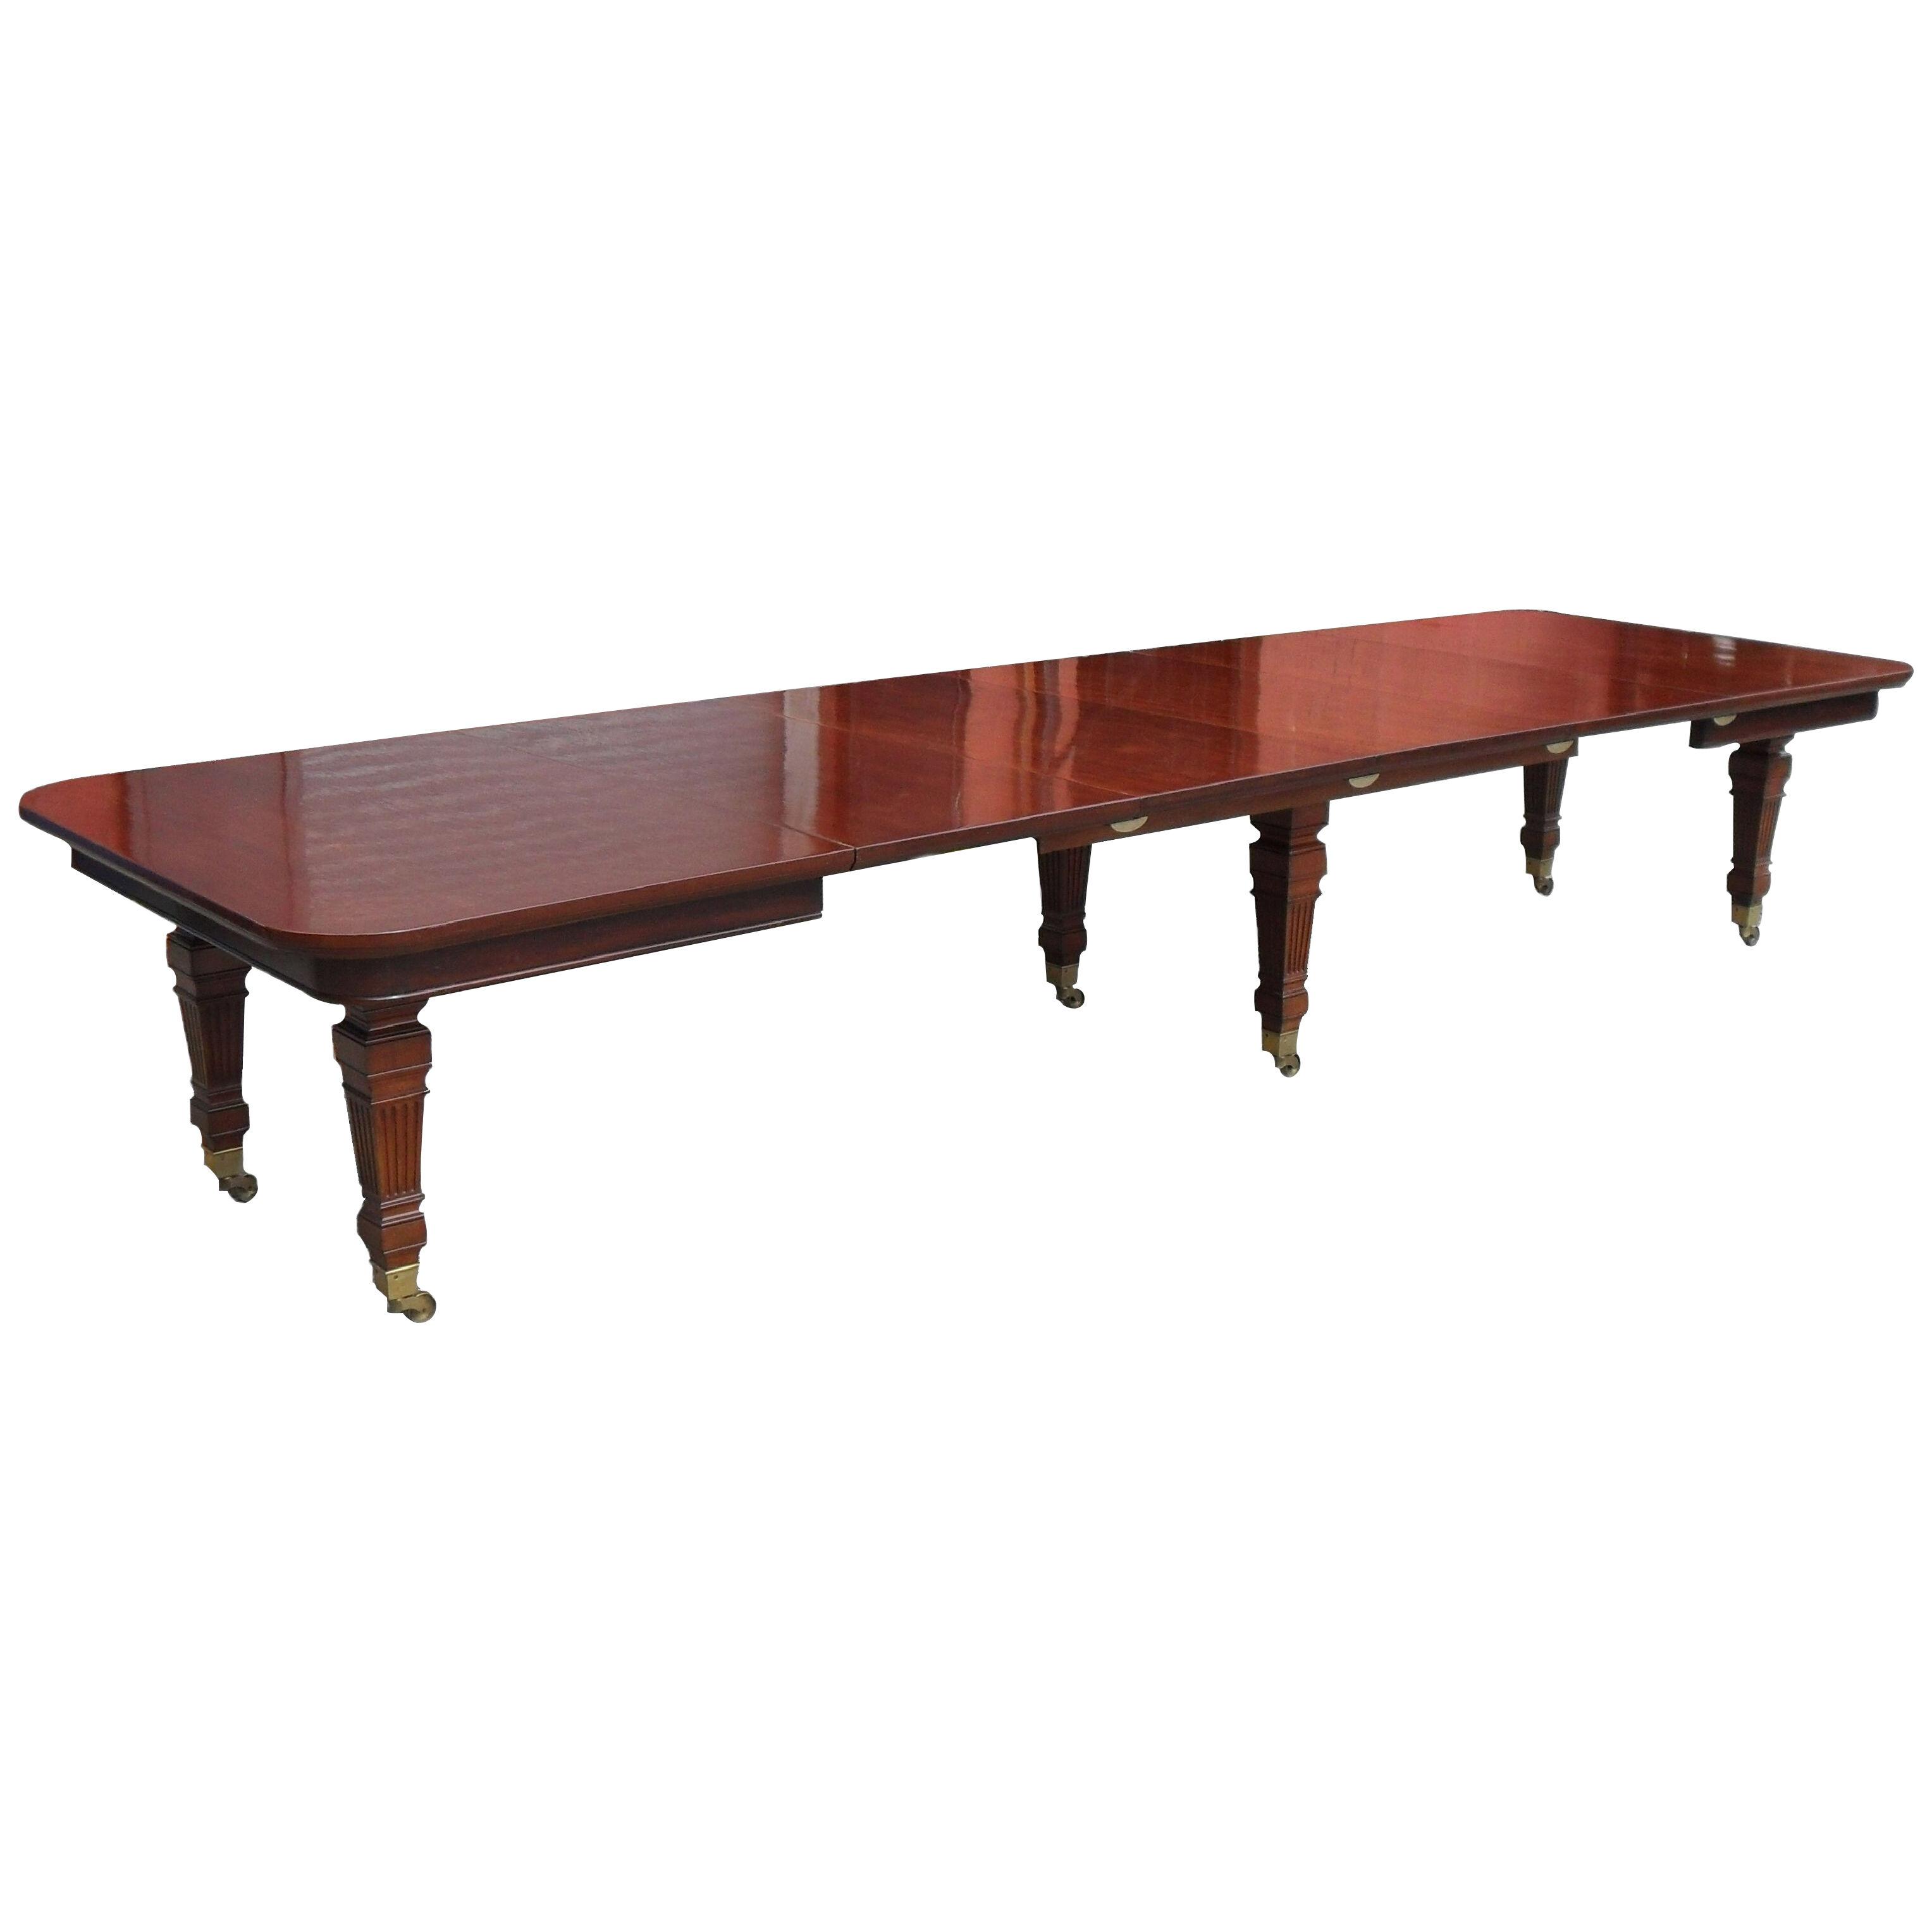 Victorian Mahogany Extending Dining Table by Gillows